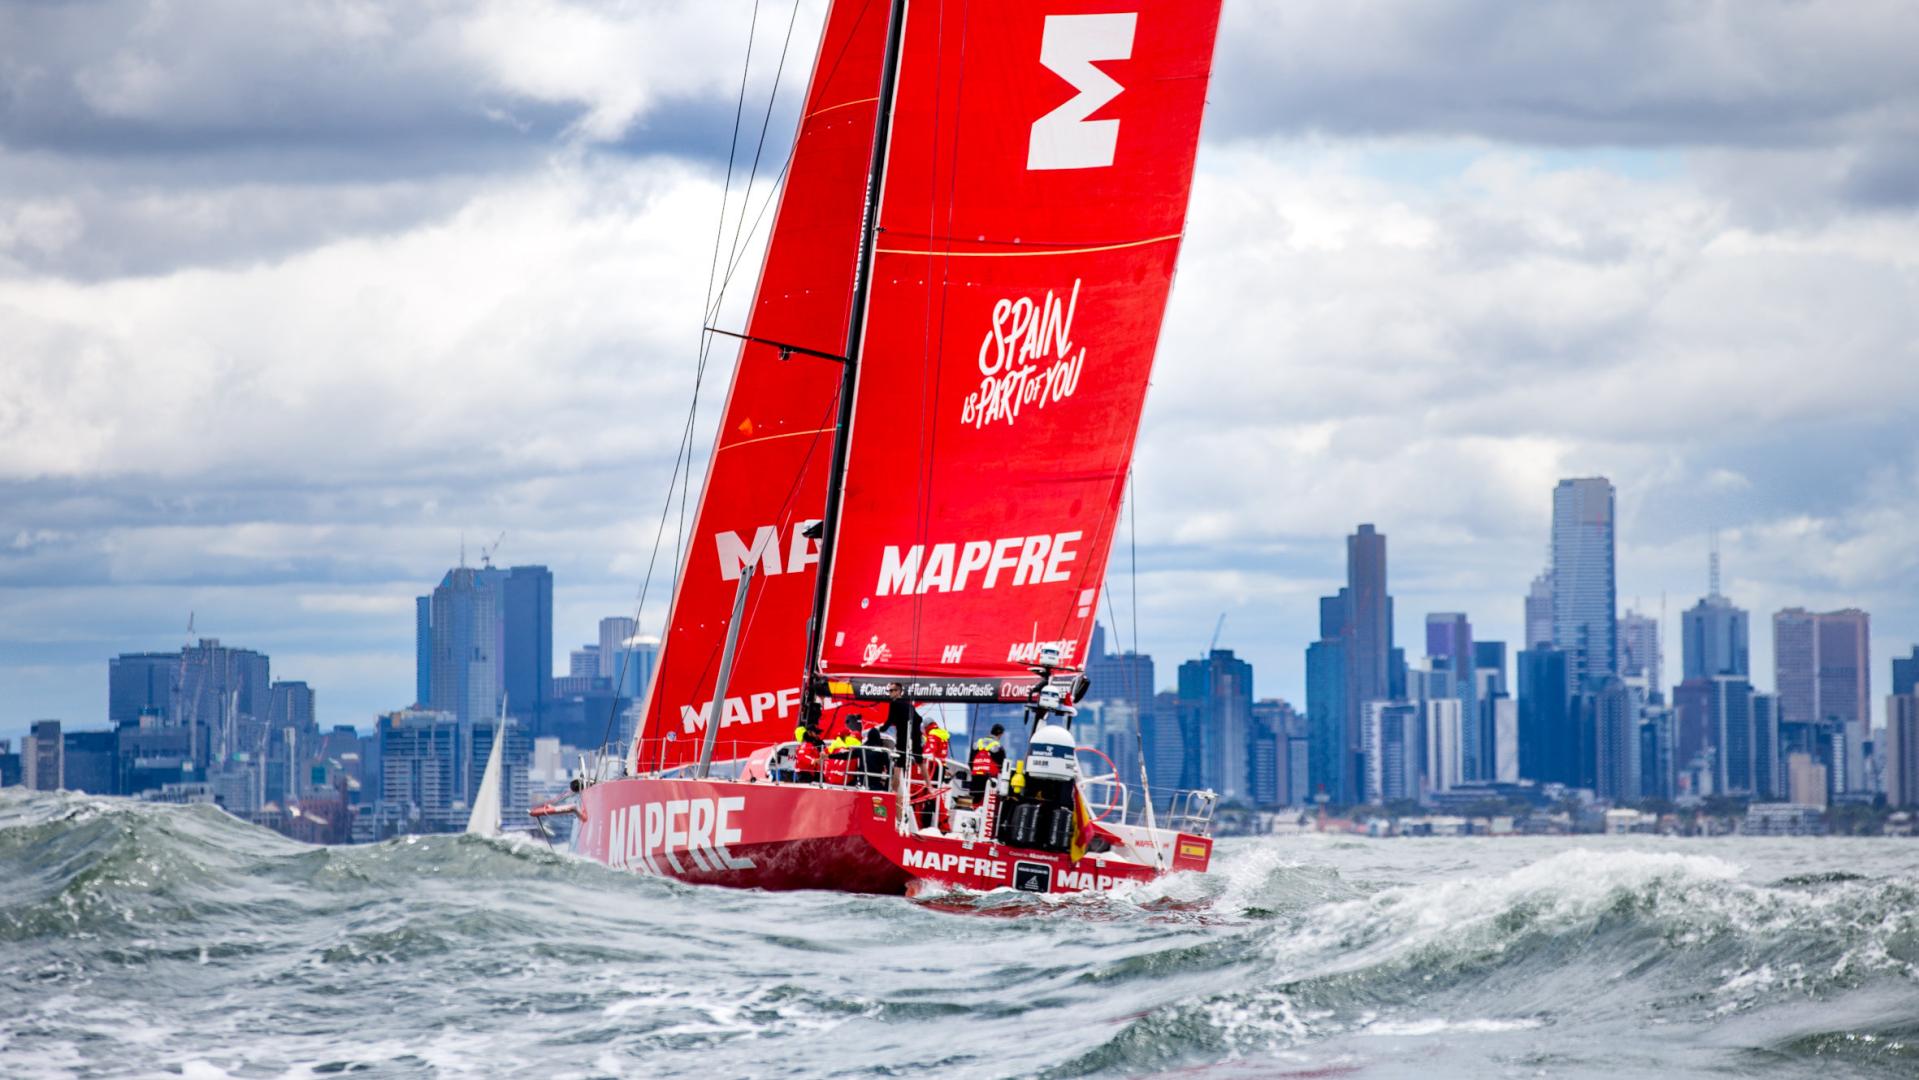 MAPFRE’s, skippered by Xabi Fernández, is now preparing for the next leg to Hong Kong